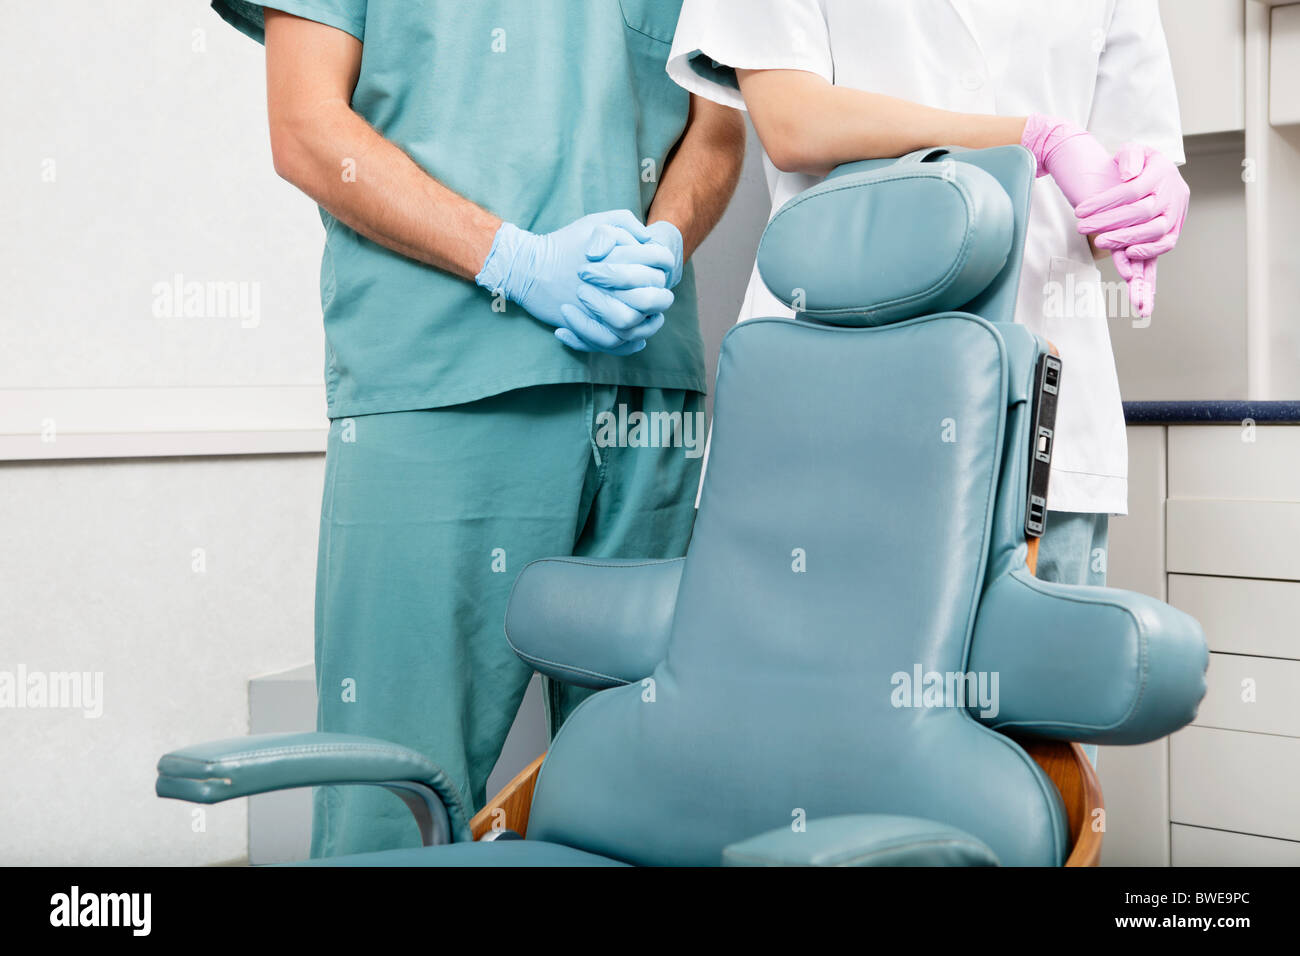 Midsection of a dentist and female assistant in exam room by dentist's chair Stock Photo